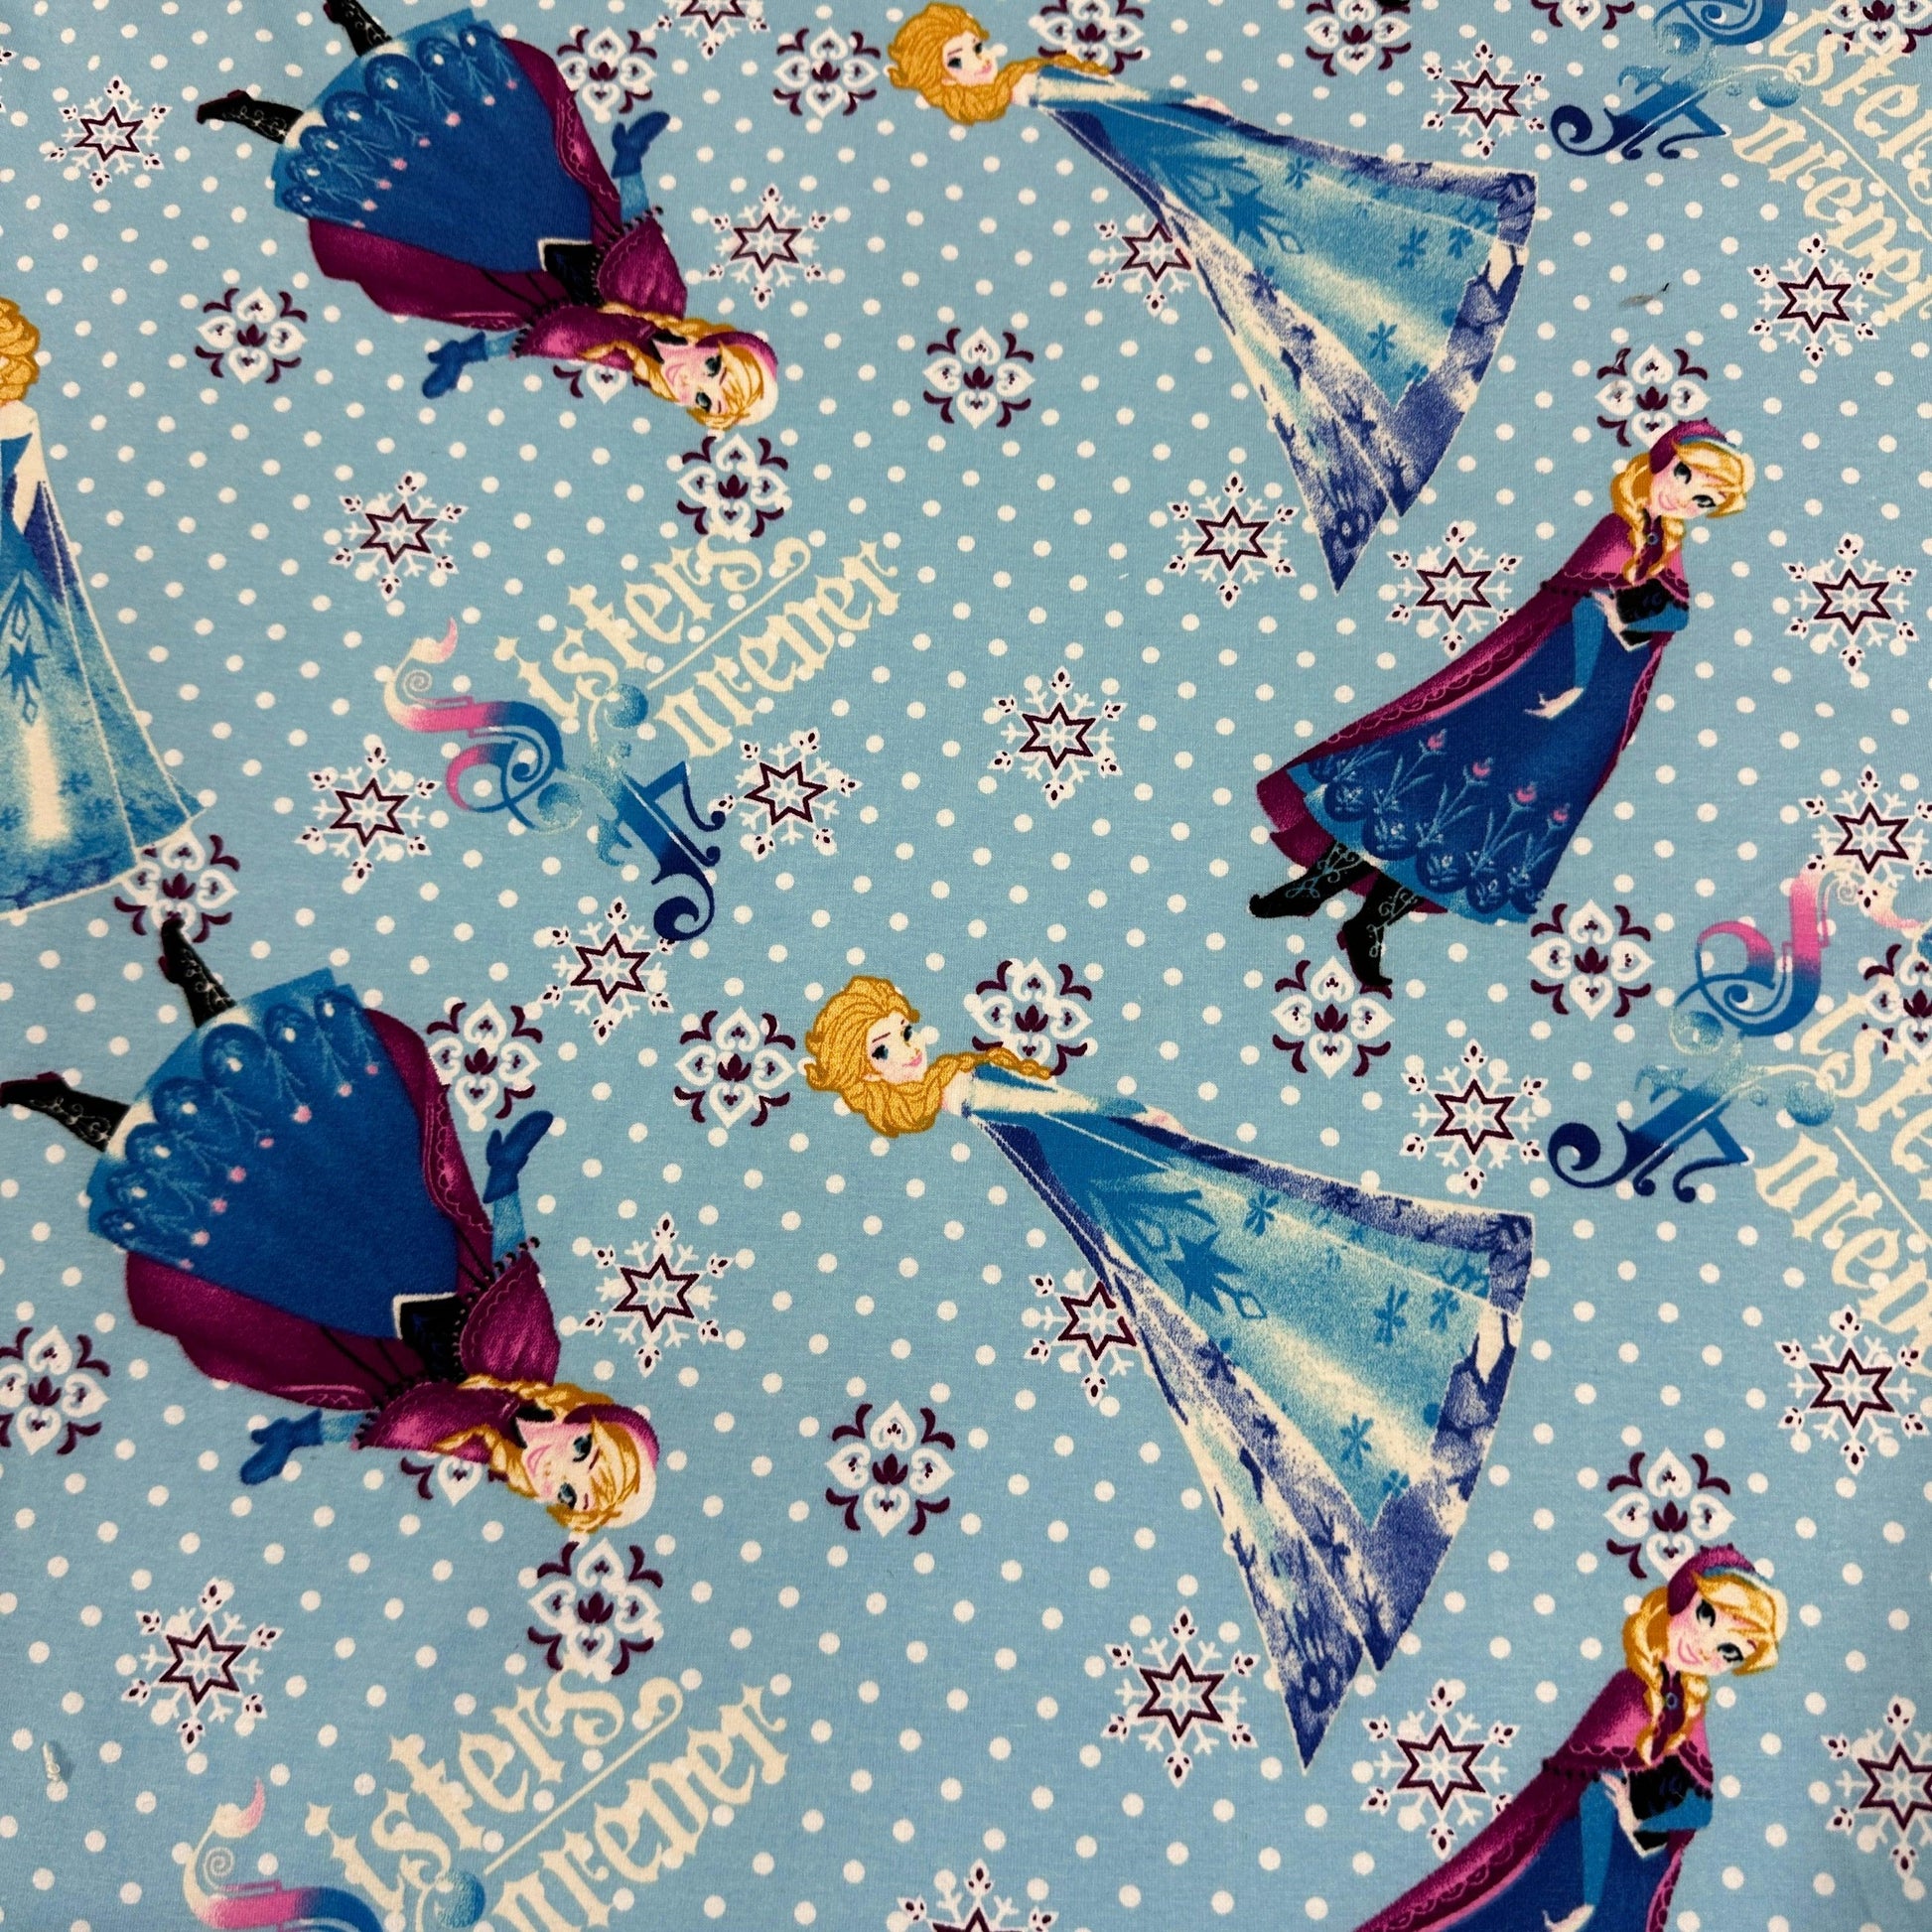 Sisters Forever on Cotton/Spandex Jersey Fabric - Nature's Fabrics